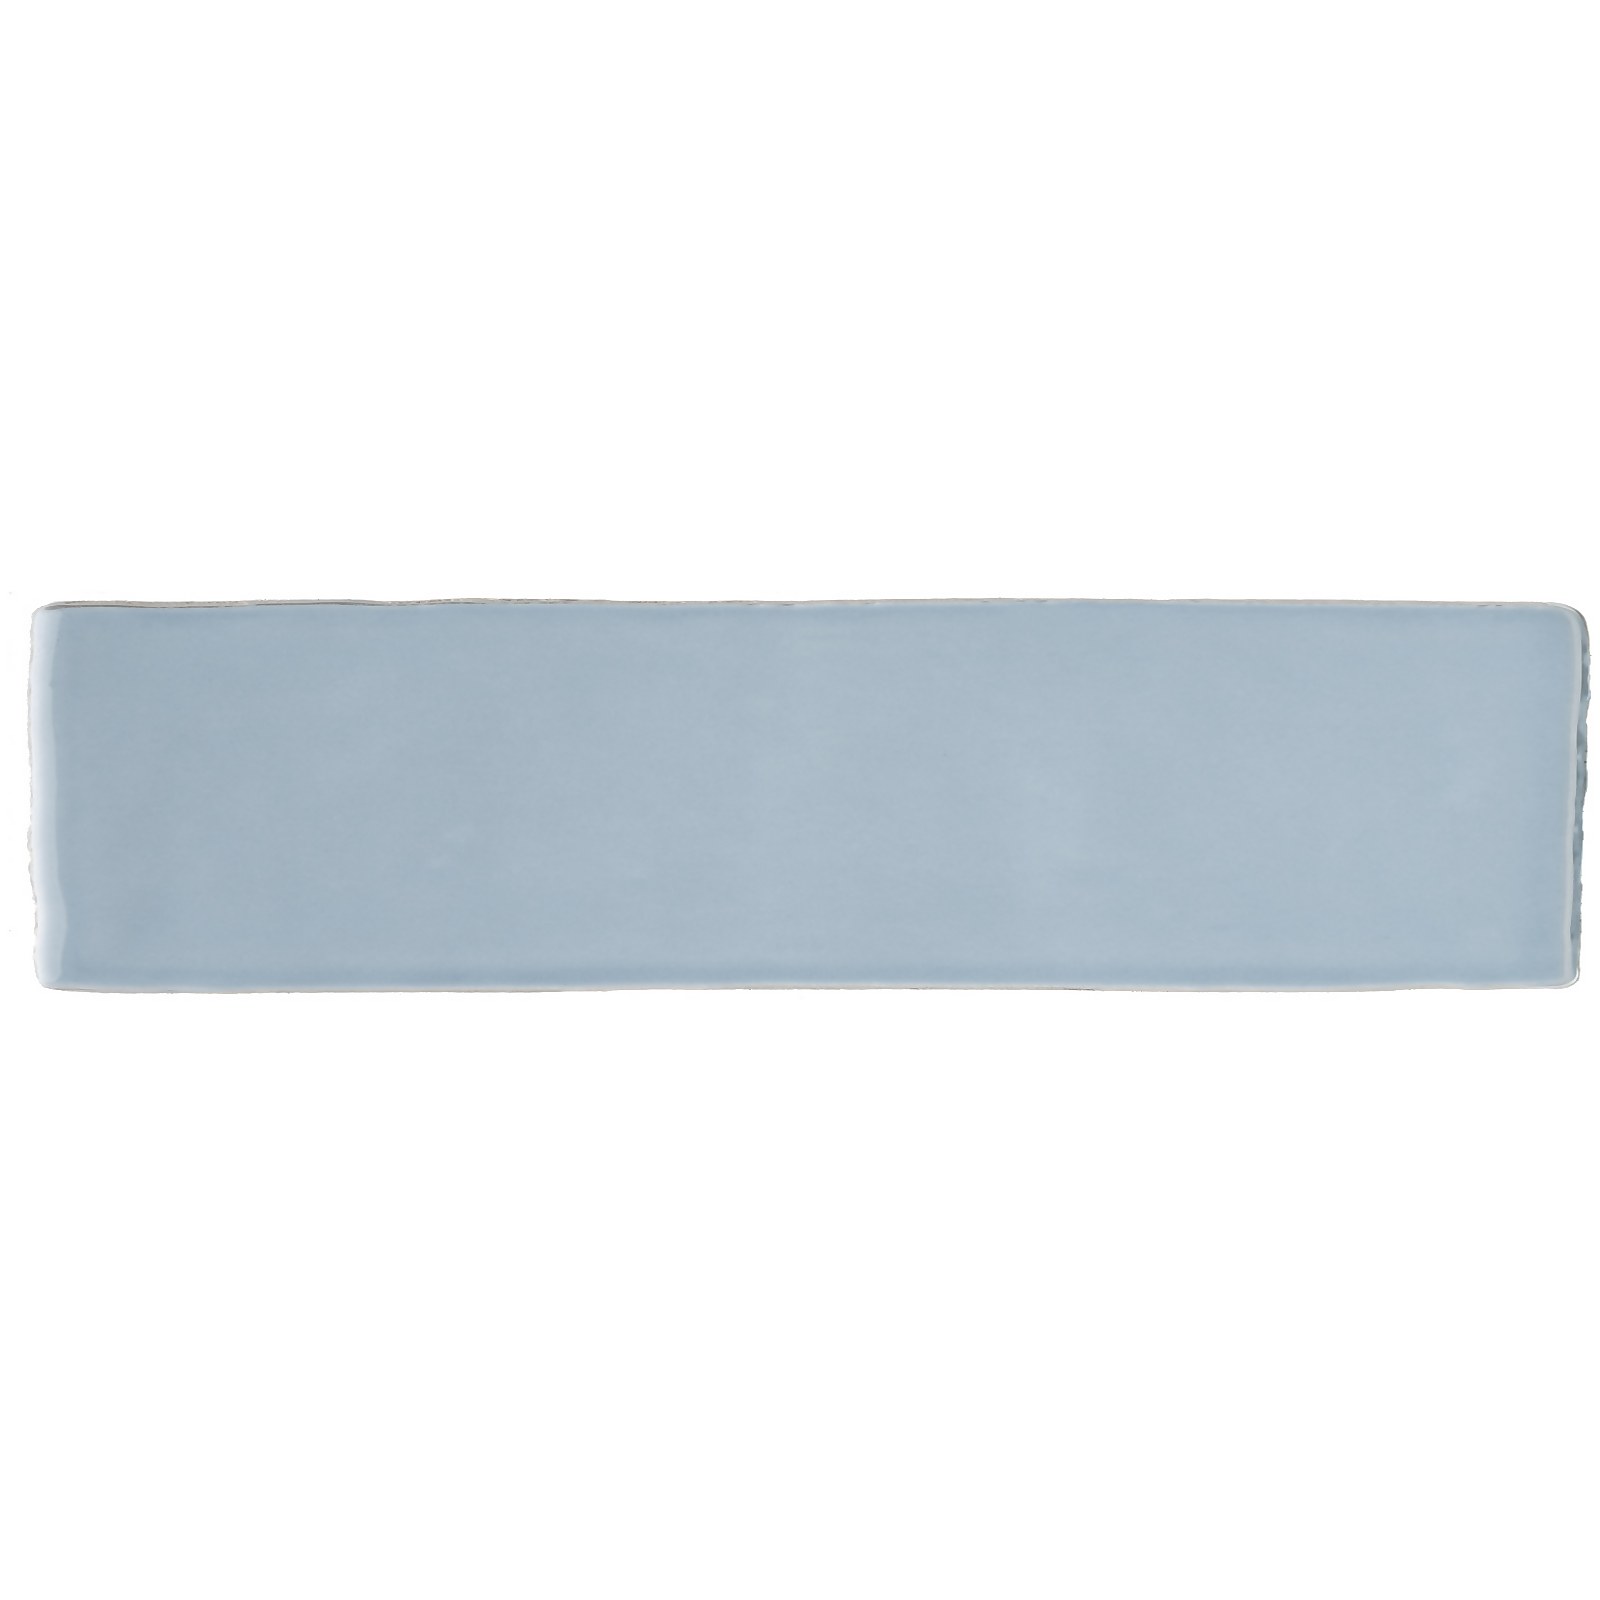 Photo of Country Living Artisan Blue Skies Ceramic Wall Tile 0.5sqm Pack - 300x75mm